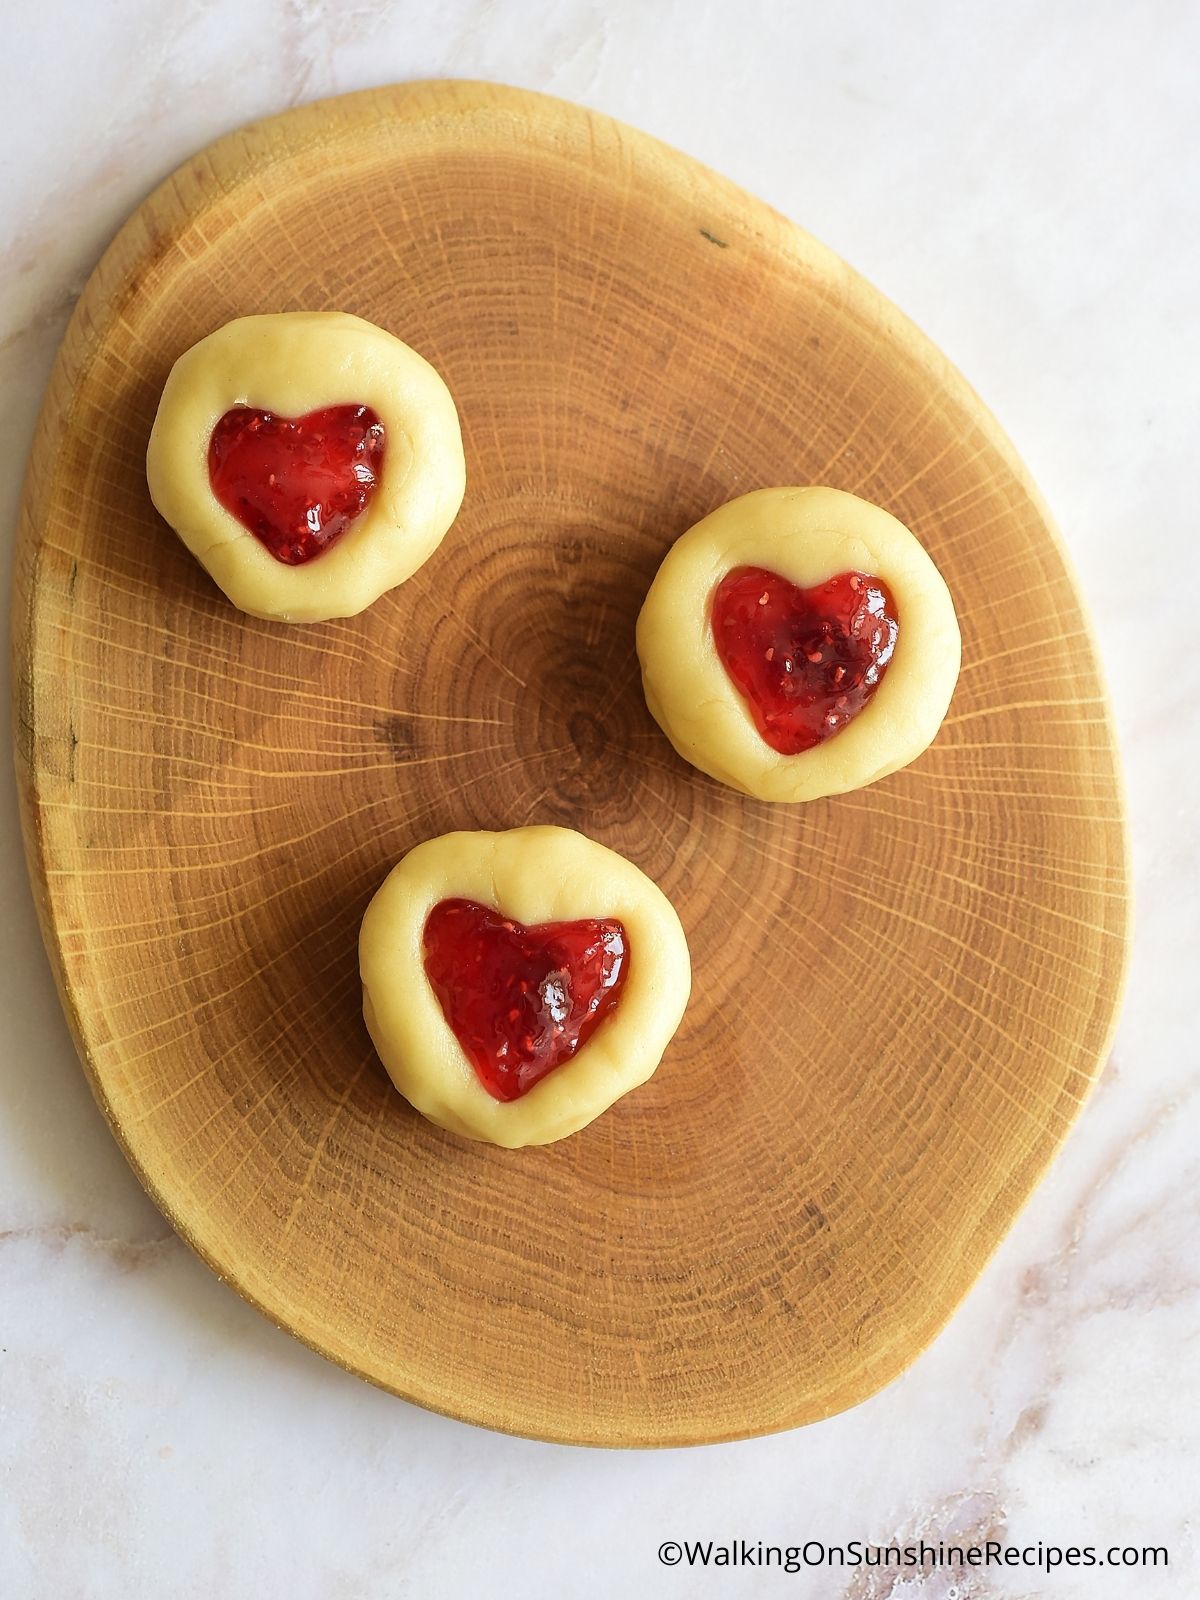 Fill thumbprints with jam.